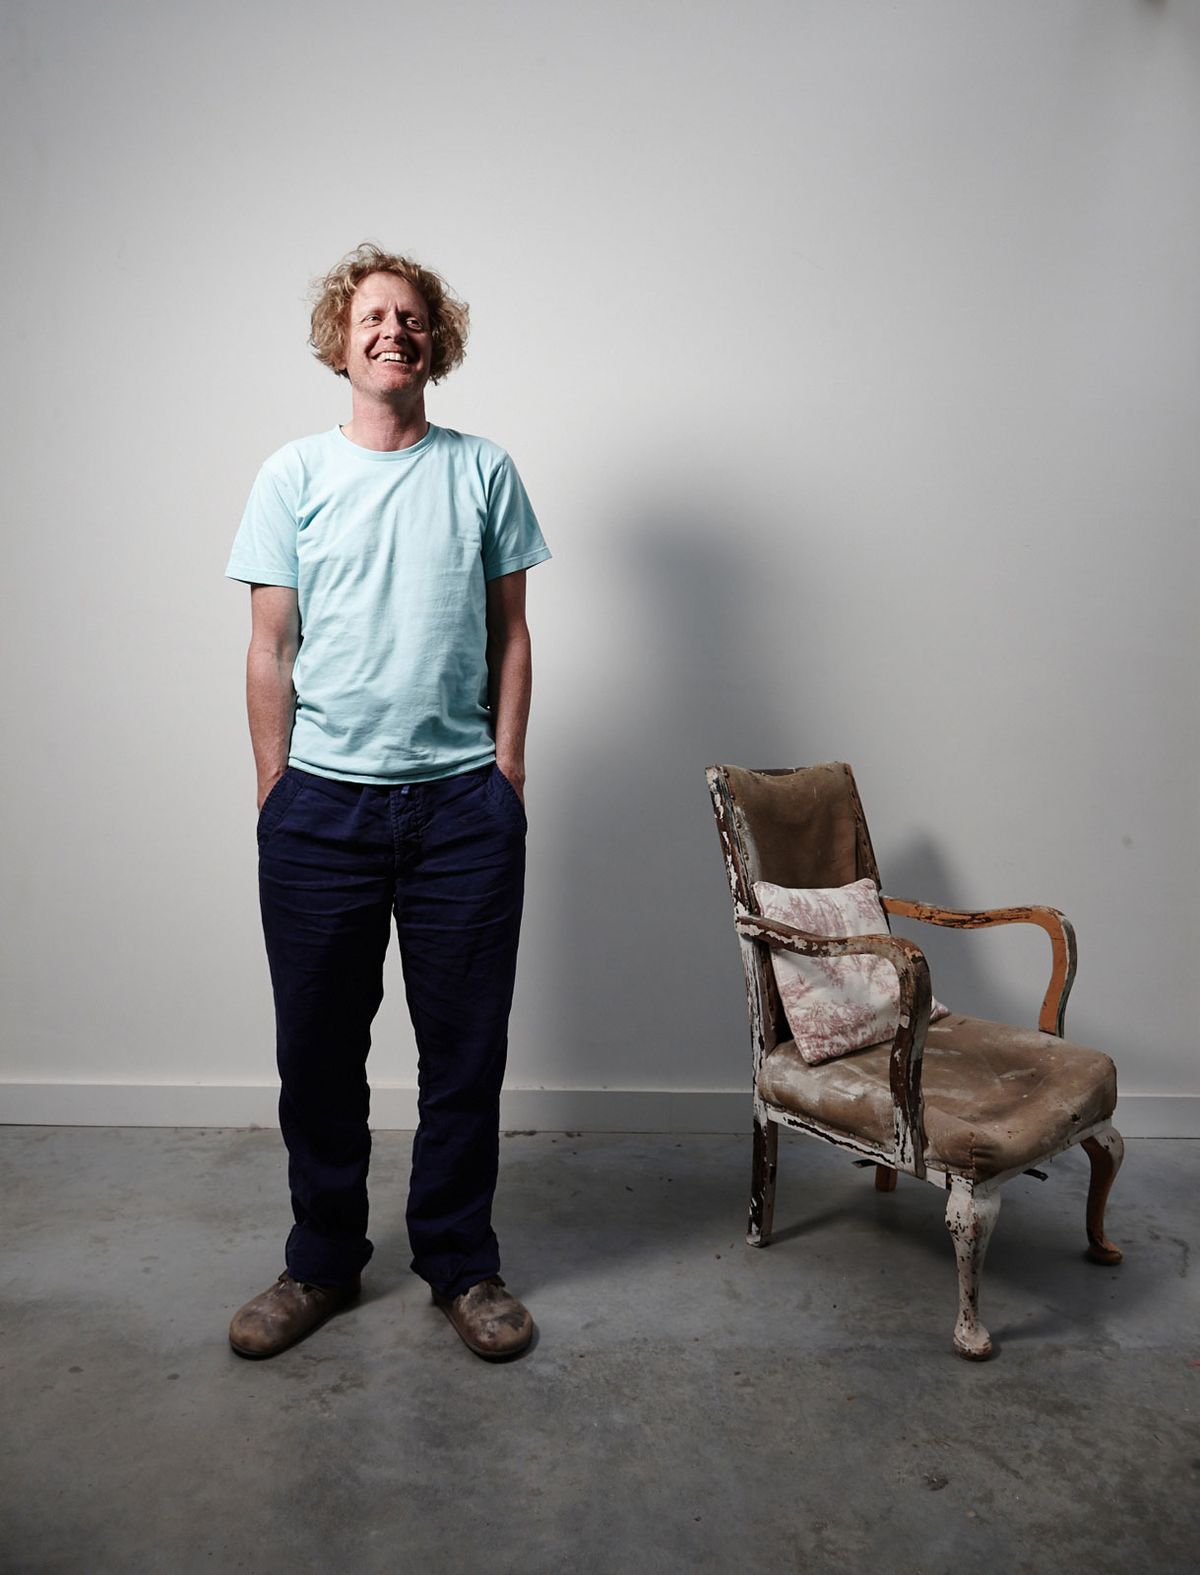 Grayson Perry, who will be starring in a new show, filmed in his London studio, called Grayson's Art Club © Richard Ansett 2020